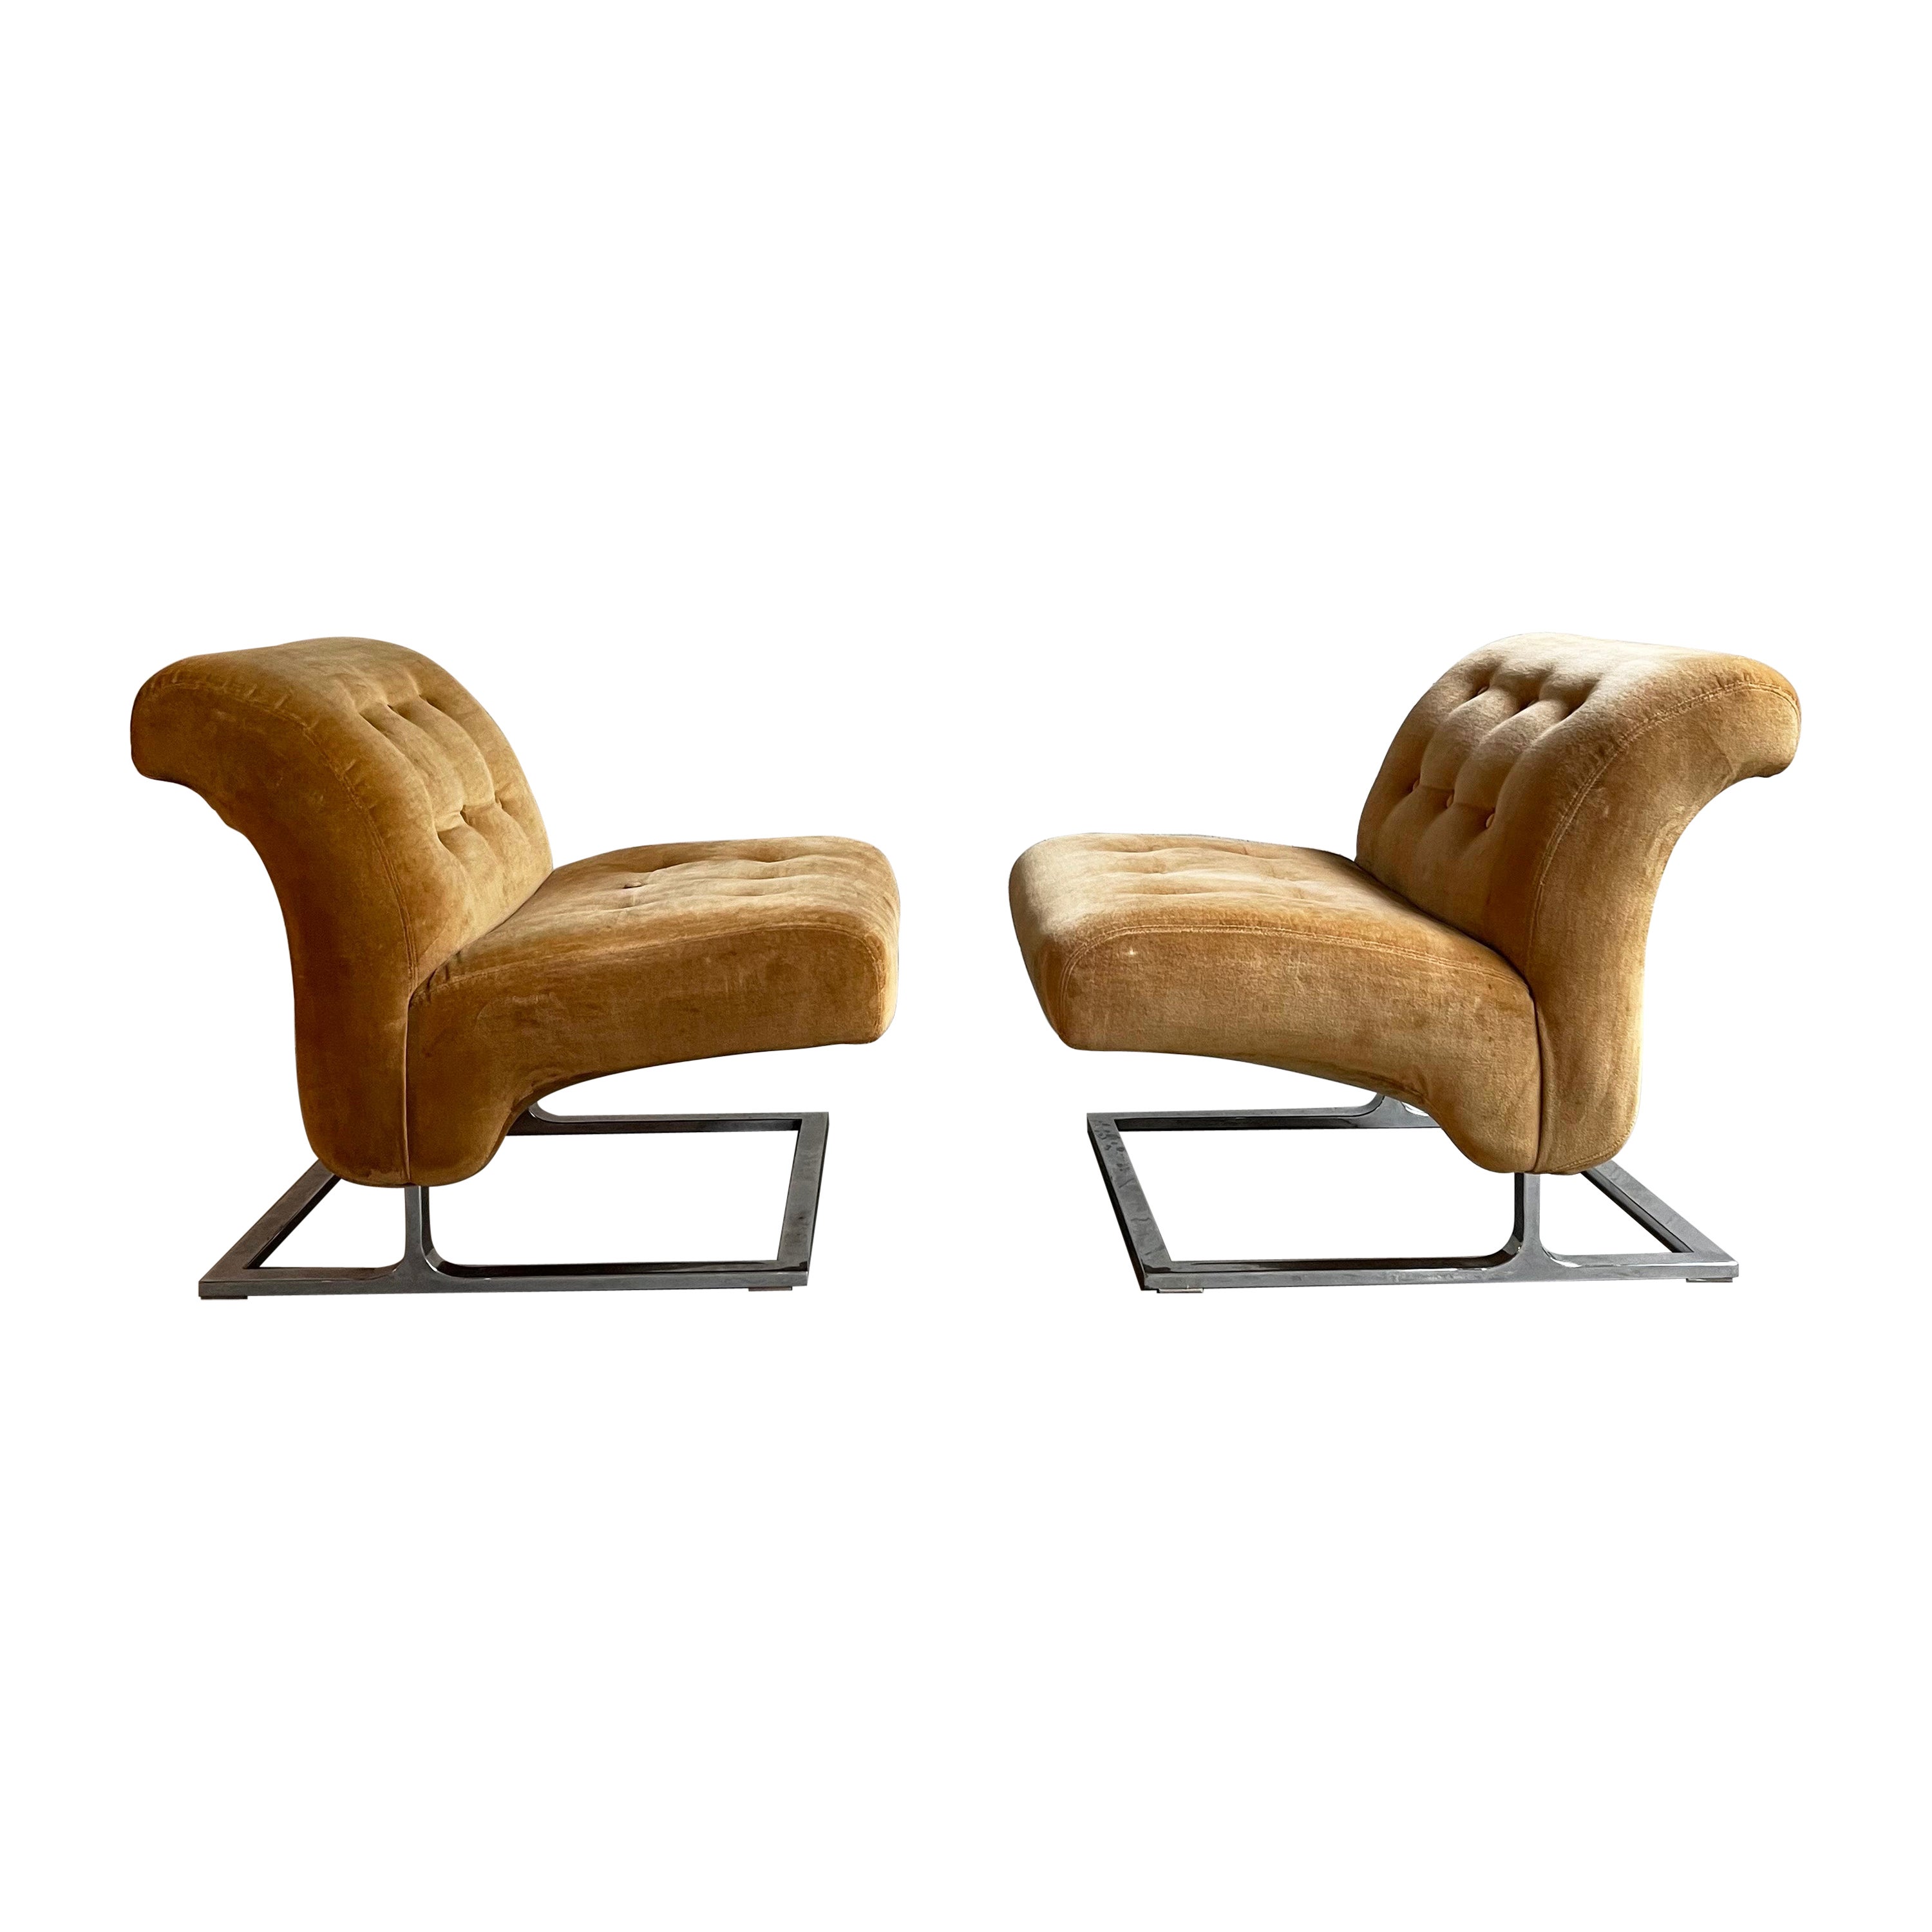 Pair Of Mid-Century Modern Chrome Cantilever Slipper Lounge Chairs